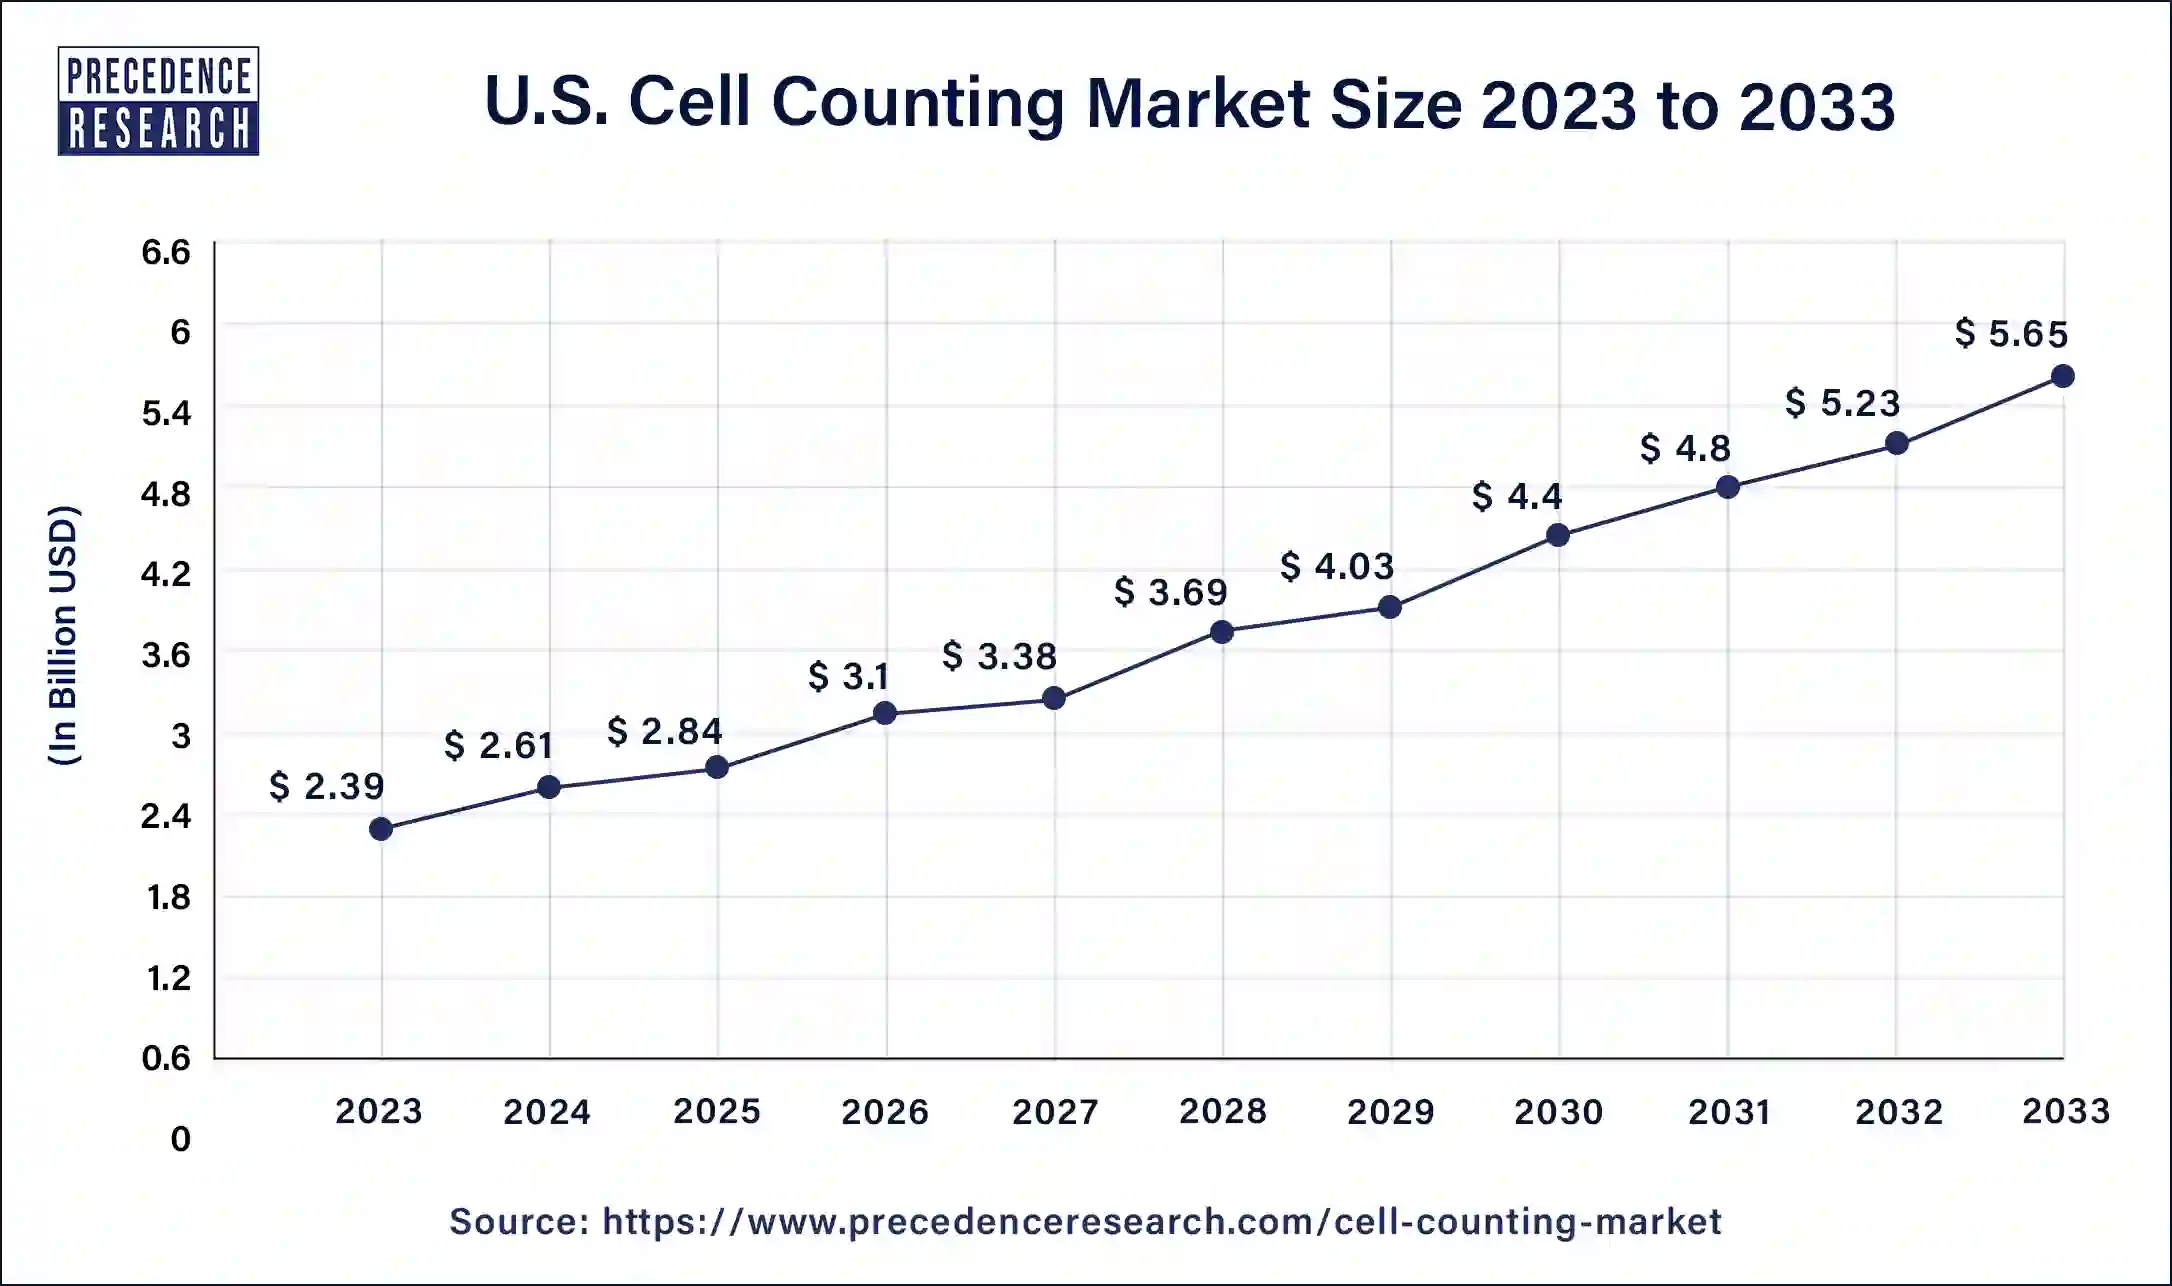 U.S. Cell Counting Market Size 2024 to 2033